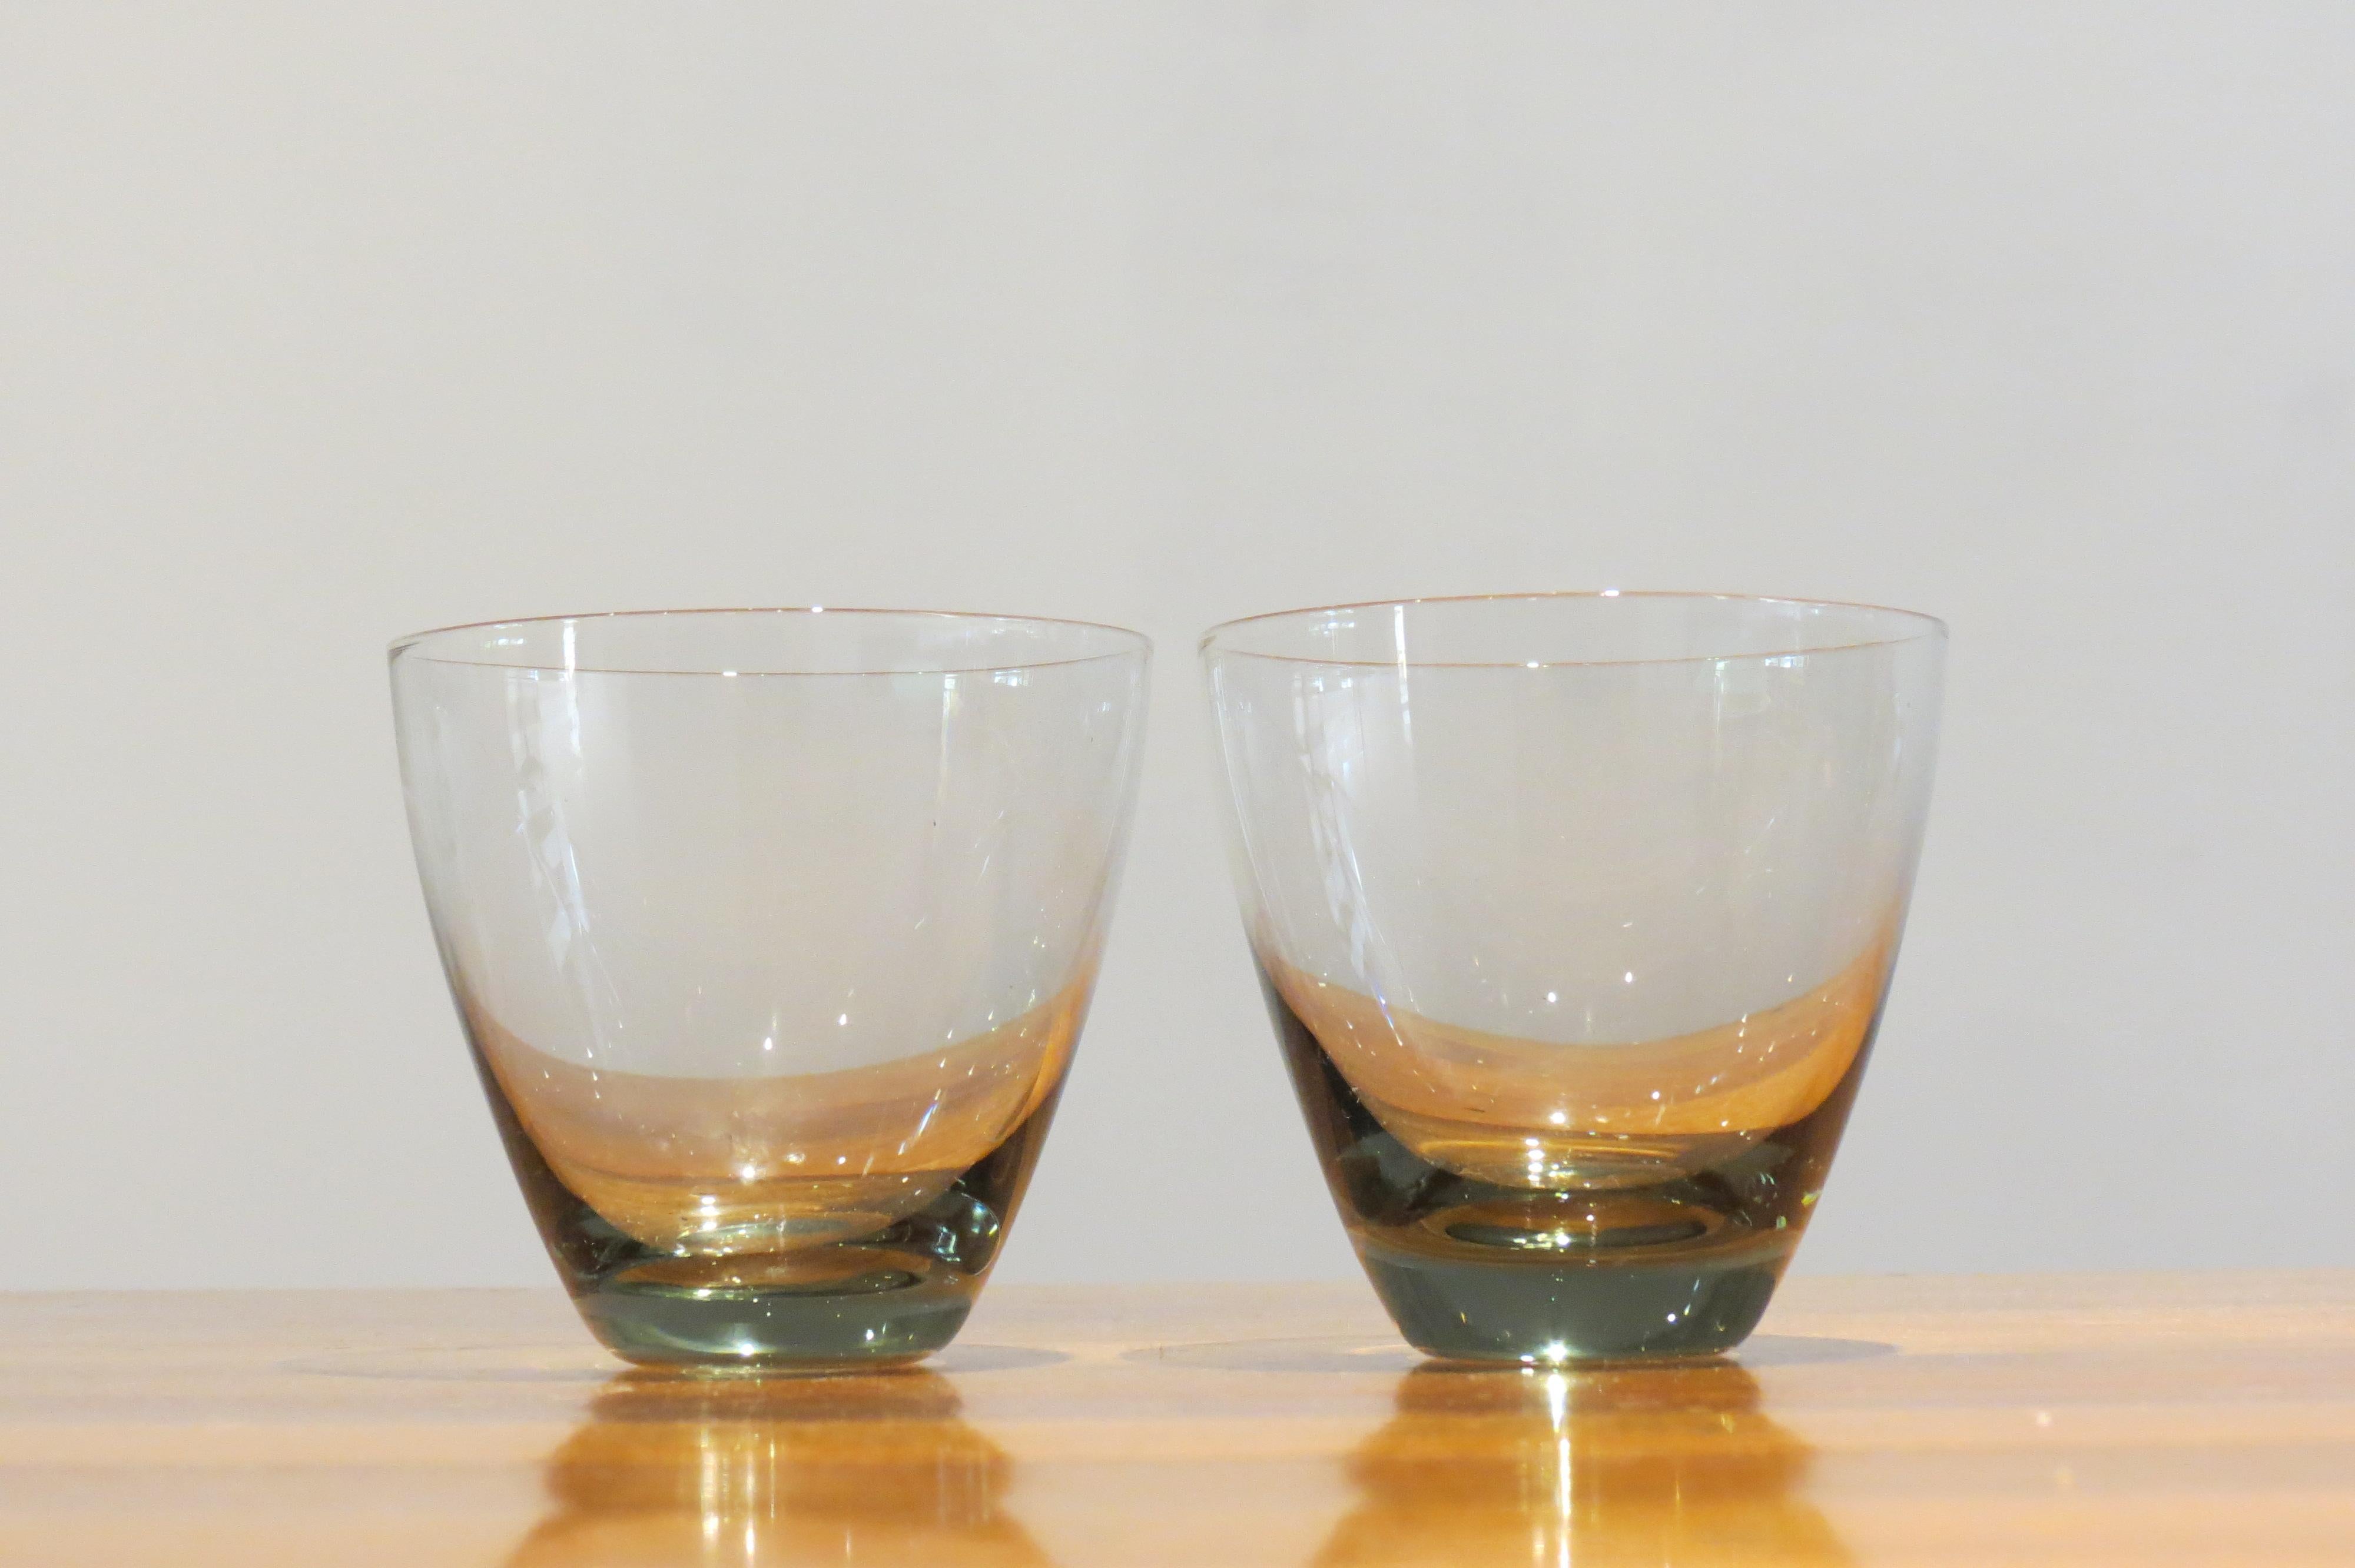 A set of two vintage Holmegaard, Denmark glasses.
Designed by Per Lutken, 1950s.
Smoked glass
Good condition
Measures: 7.5 cm tall, 8 cm diameter widest point
St931.
 